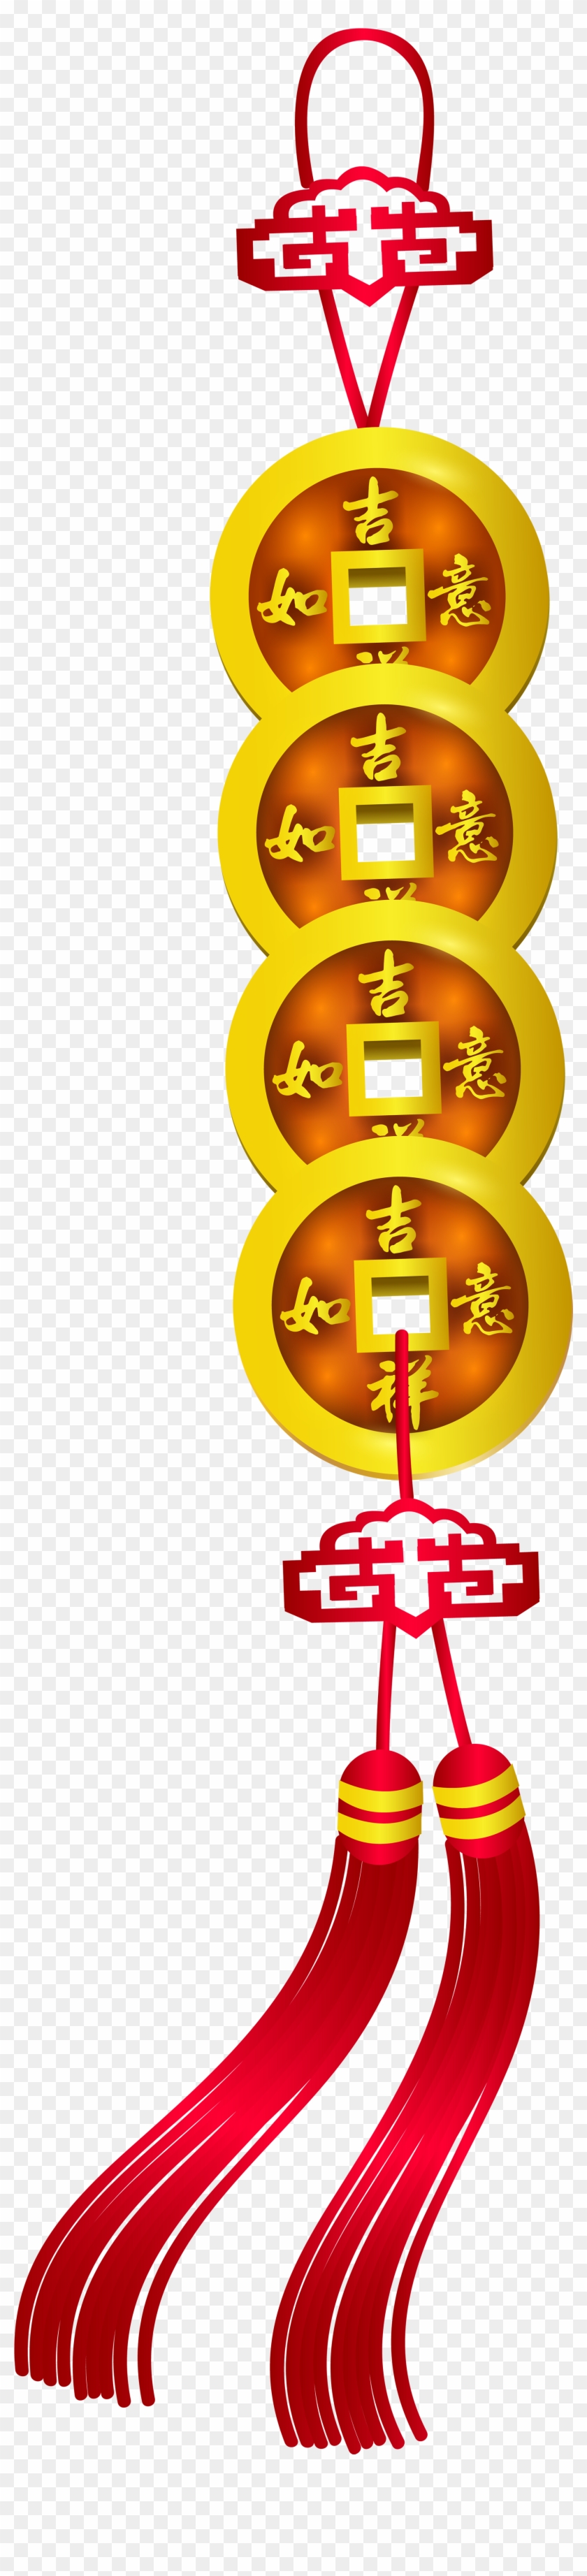 Chinese New Year Decoration Png Clip Art - Graphic Design #389883